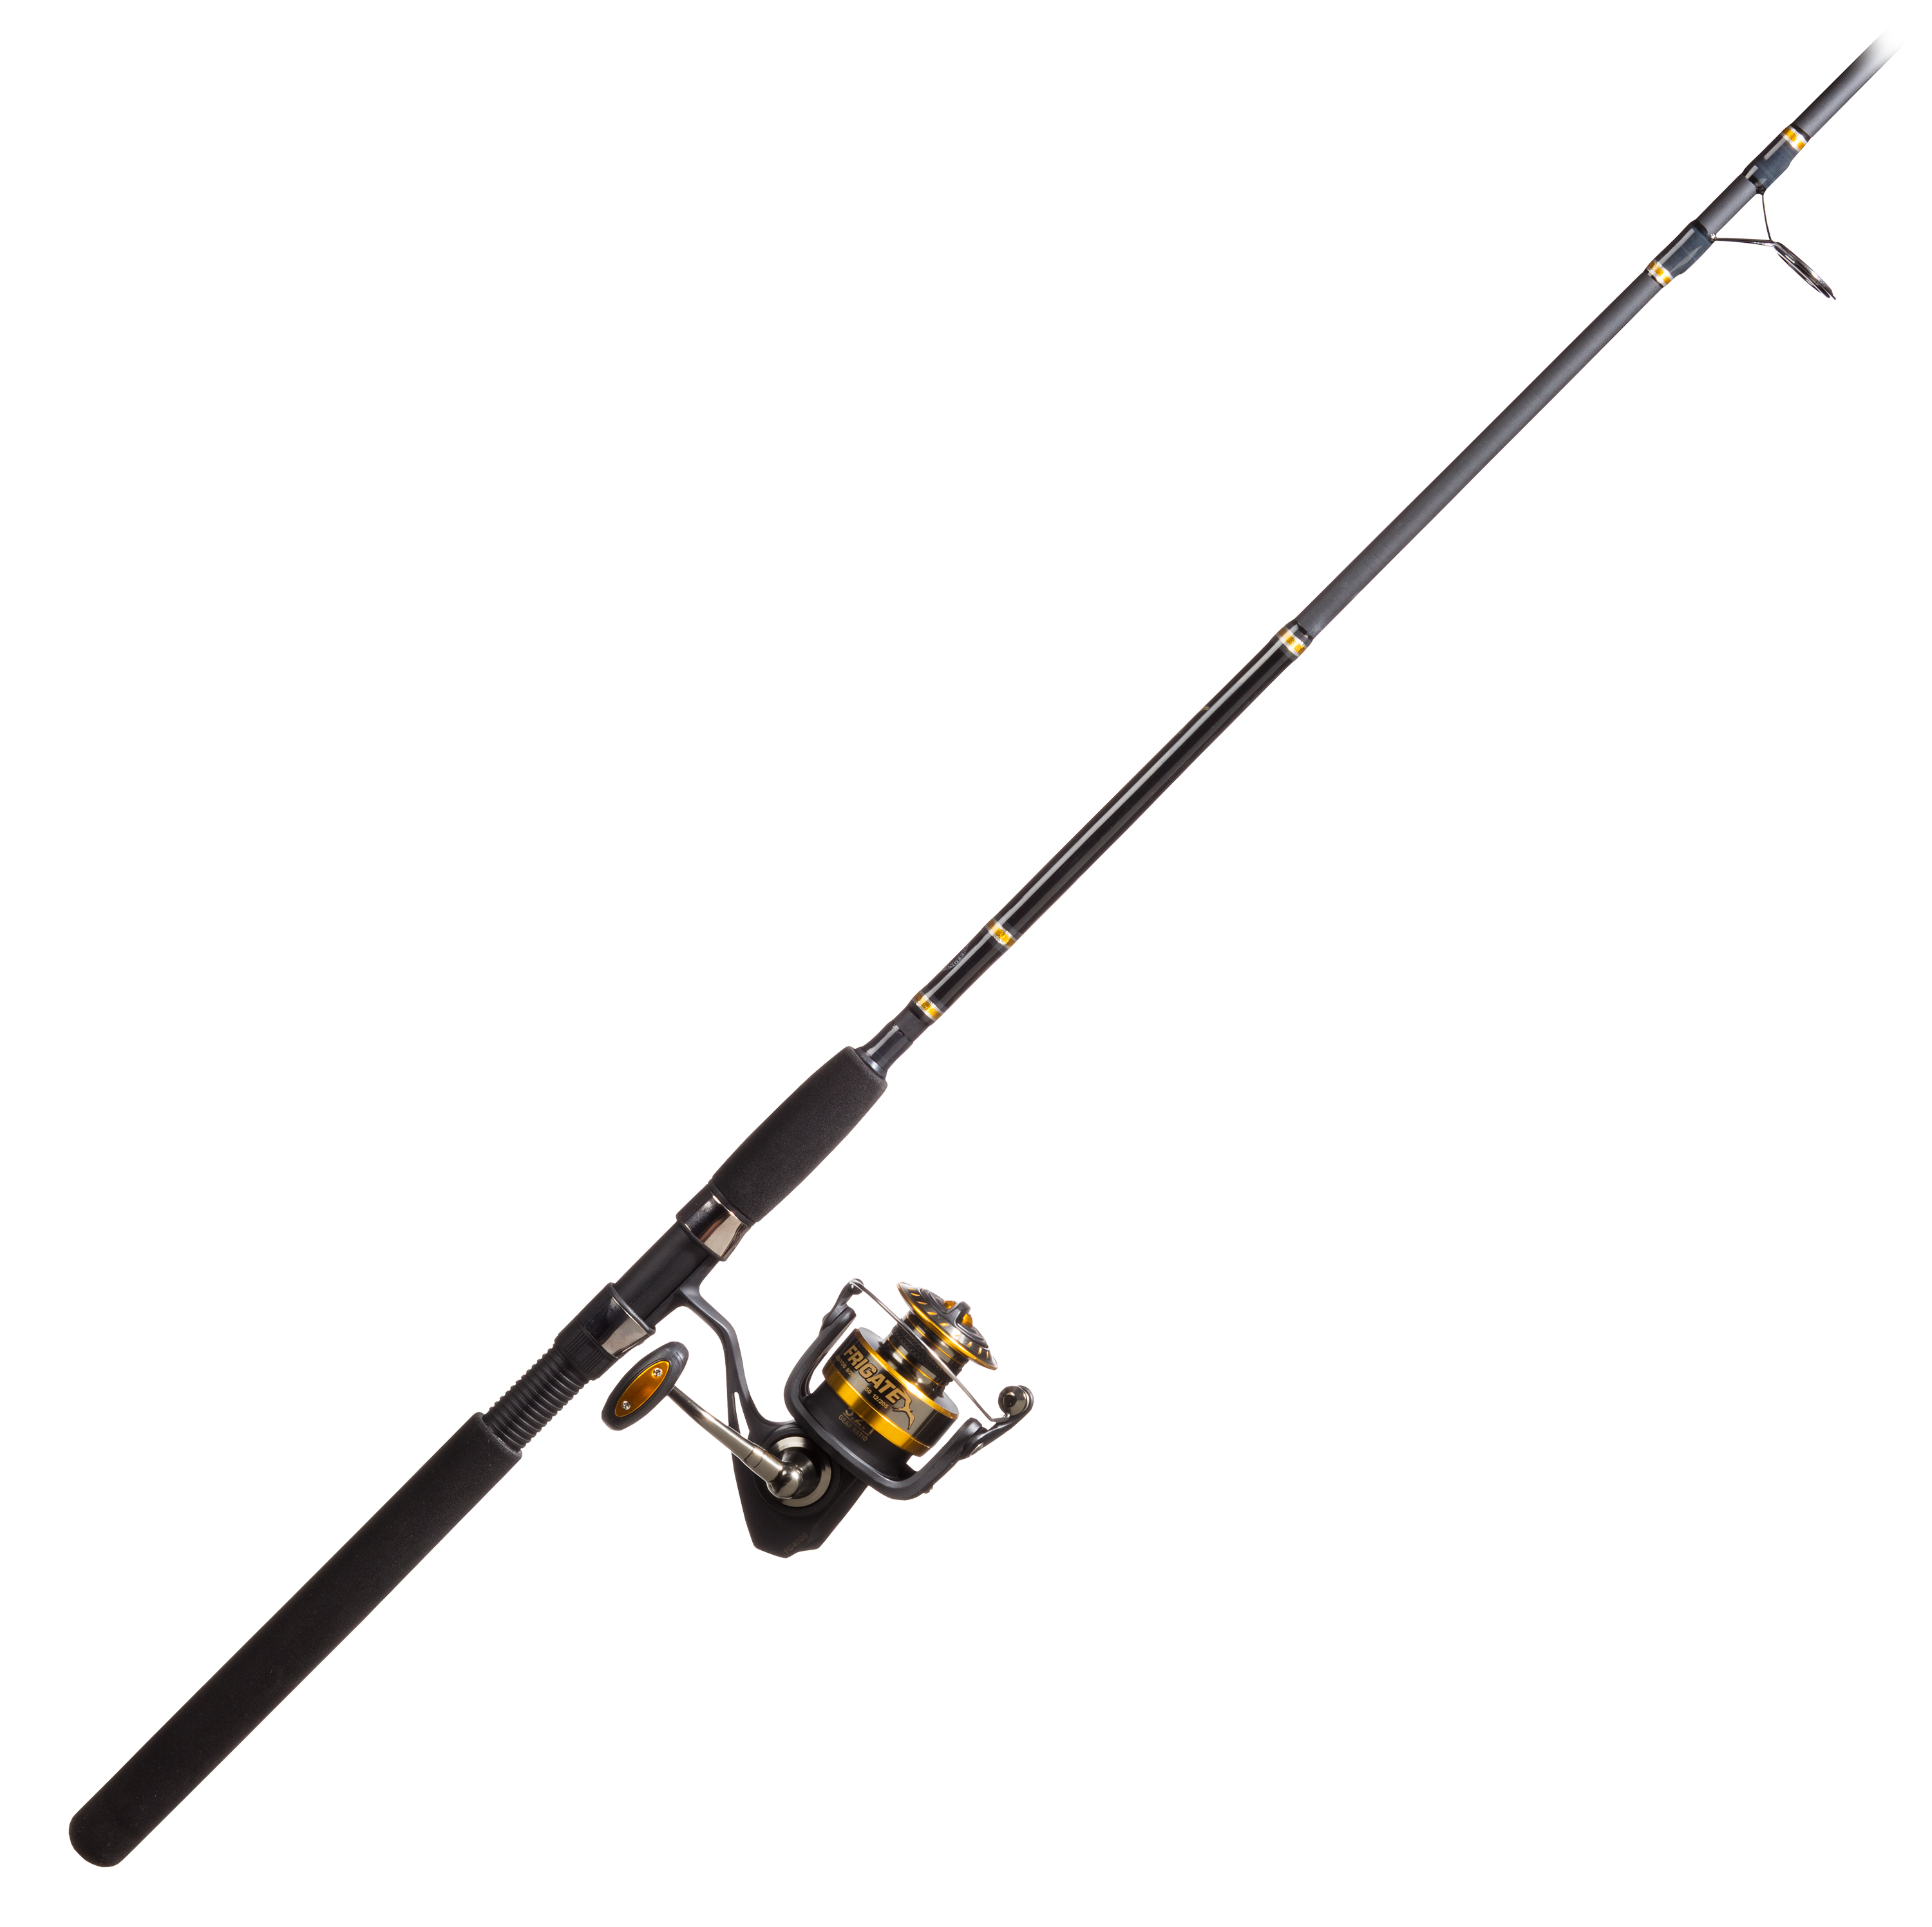 Offshore Angler Frigate Rod and Reel Combo - Model FGB7091530-2